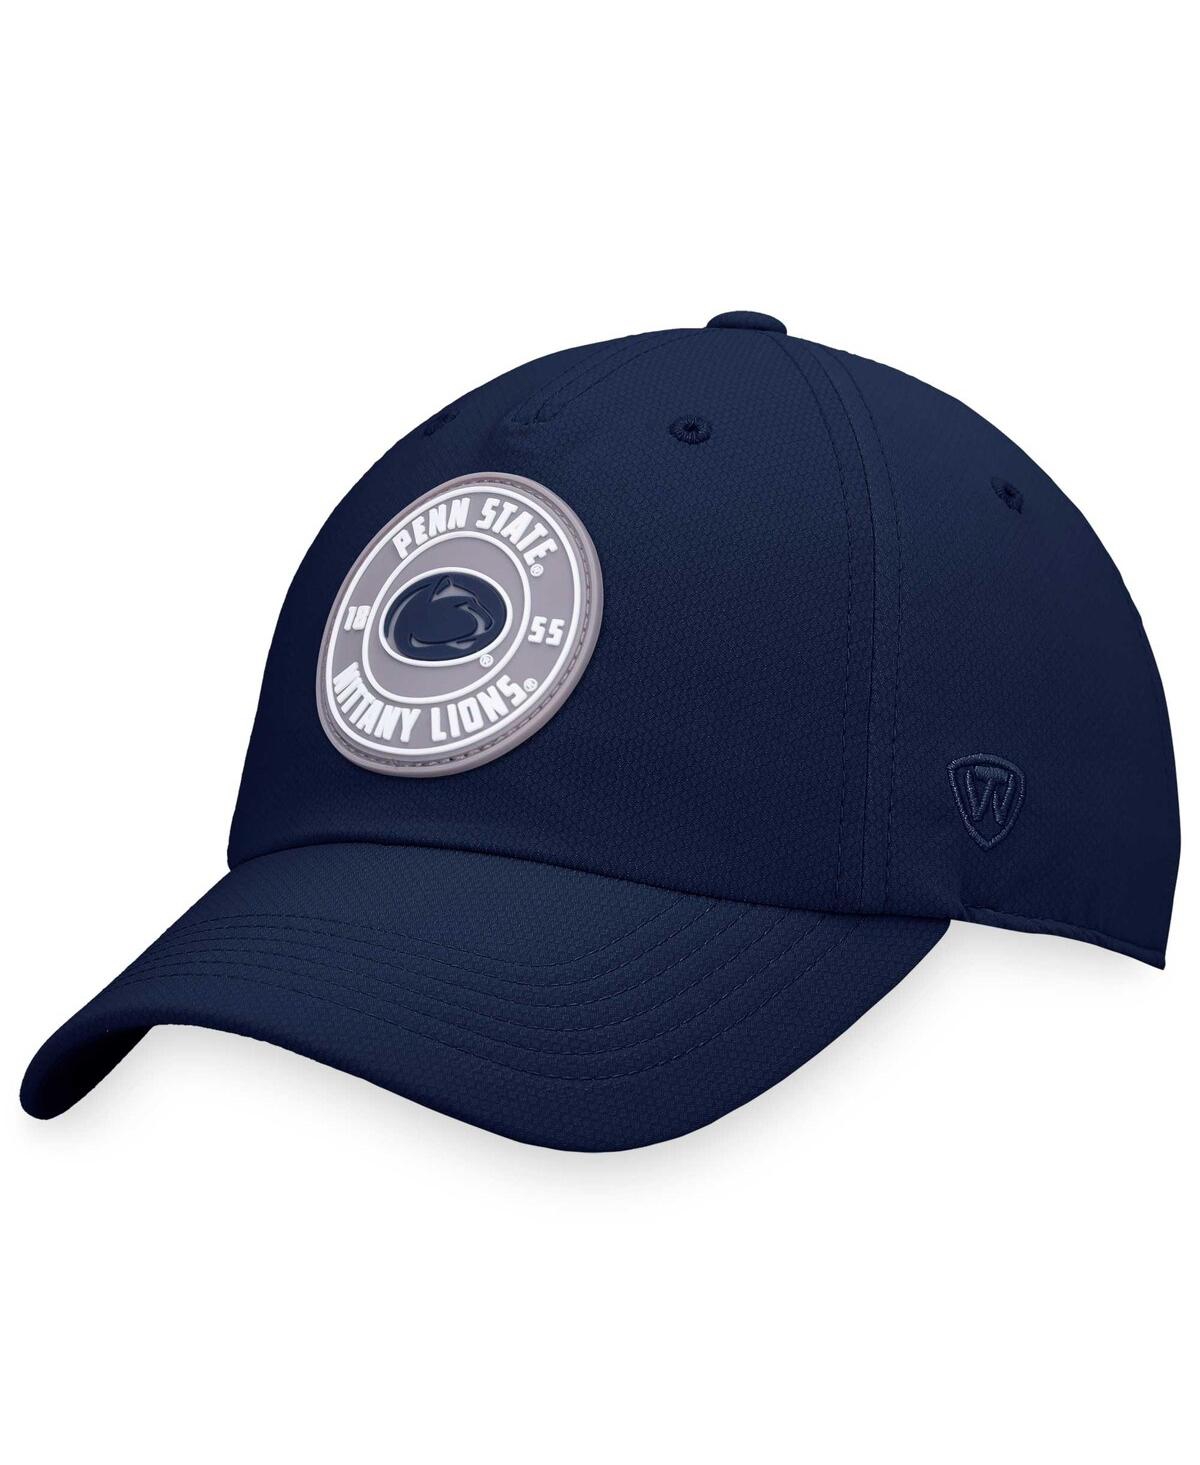 Top Of The World Men's  Navy Penn State Nittany Lions Region Adjustable Hat